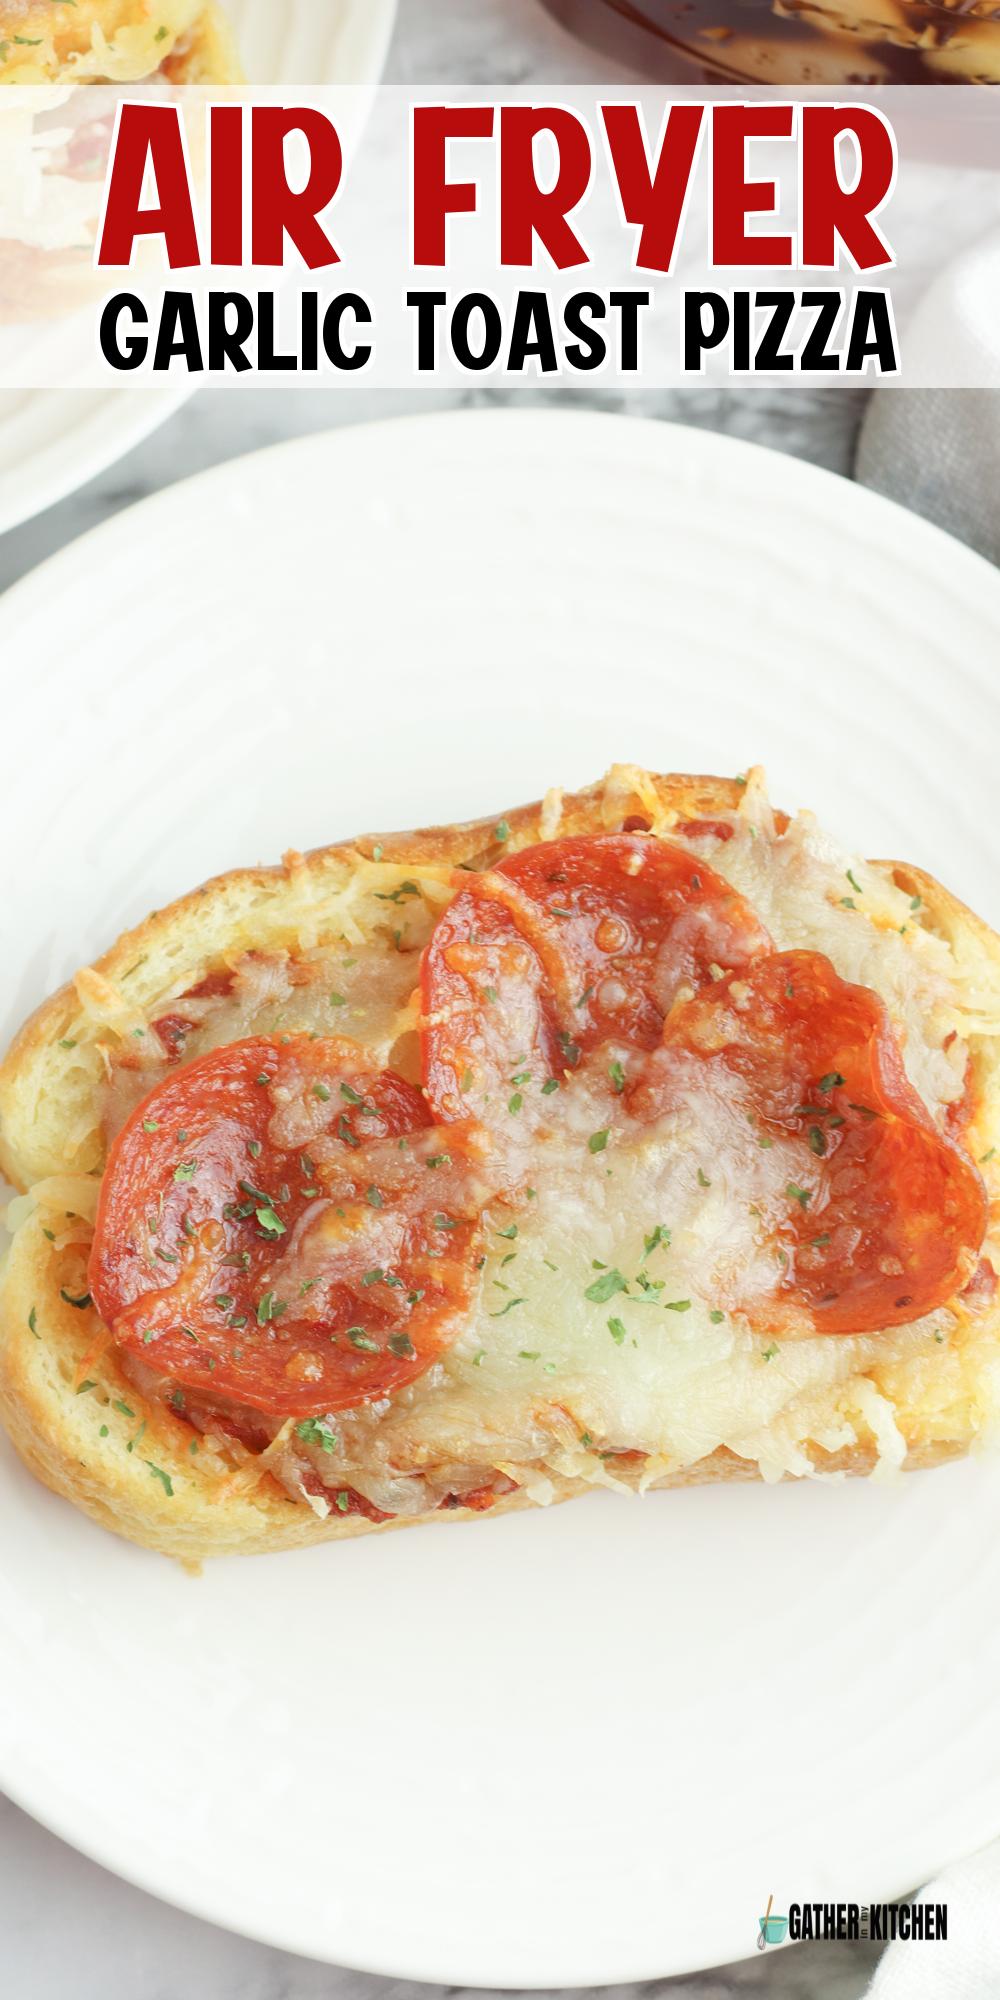 Pin image: top says "Air Fryer Garlic Toast Pizza" and has a picture of garlic toast pizza on the bottom.